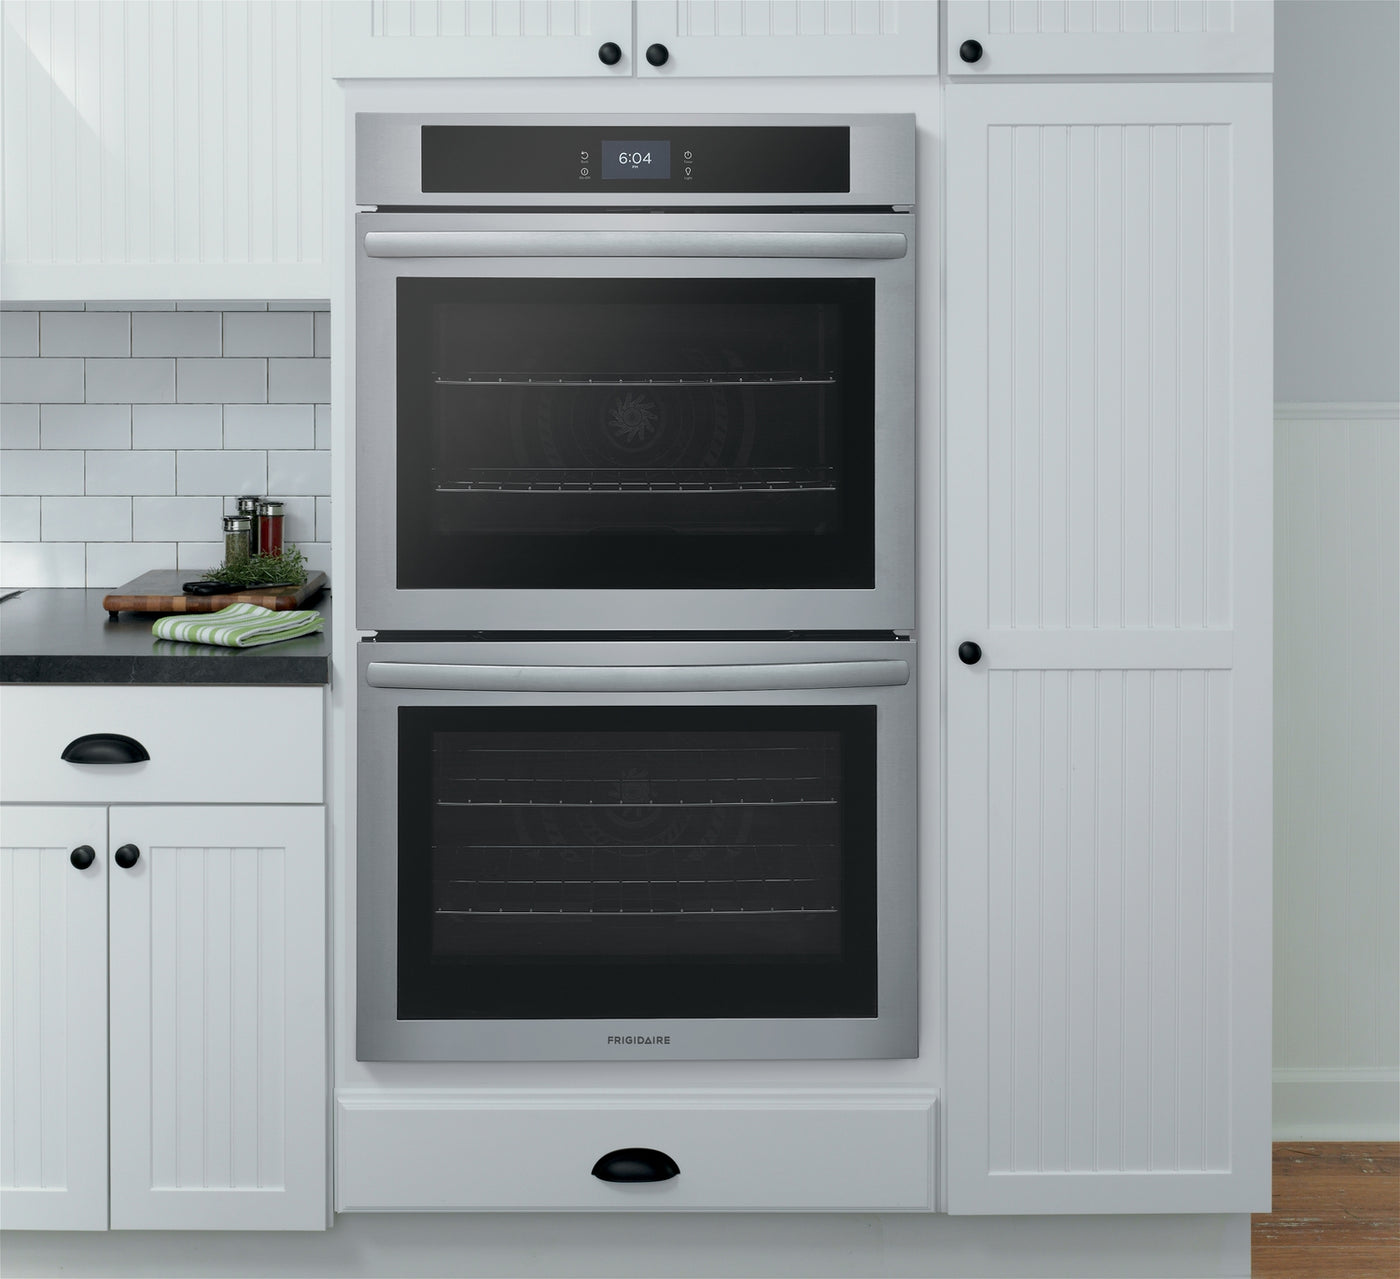 Frigidaire Stainless Steel 30" Double Wall Oven with Fan Convection (10.6 Cu. Ft) - FCWD3027AS